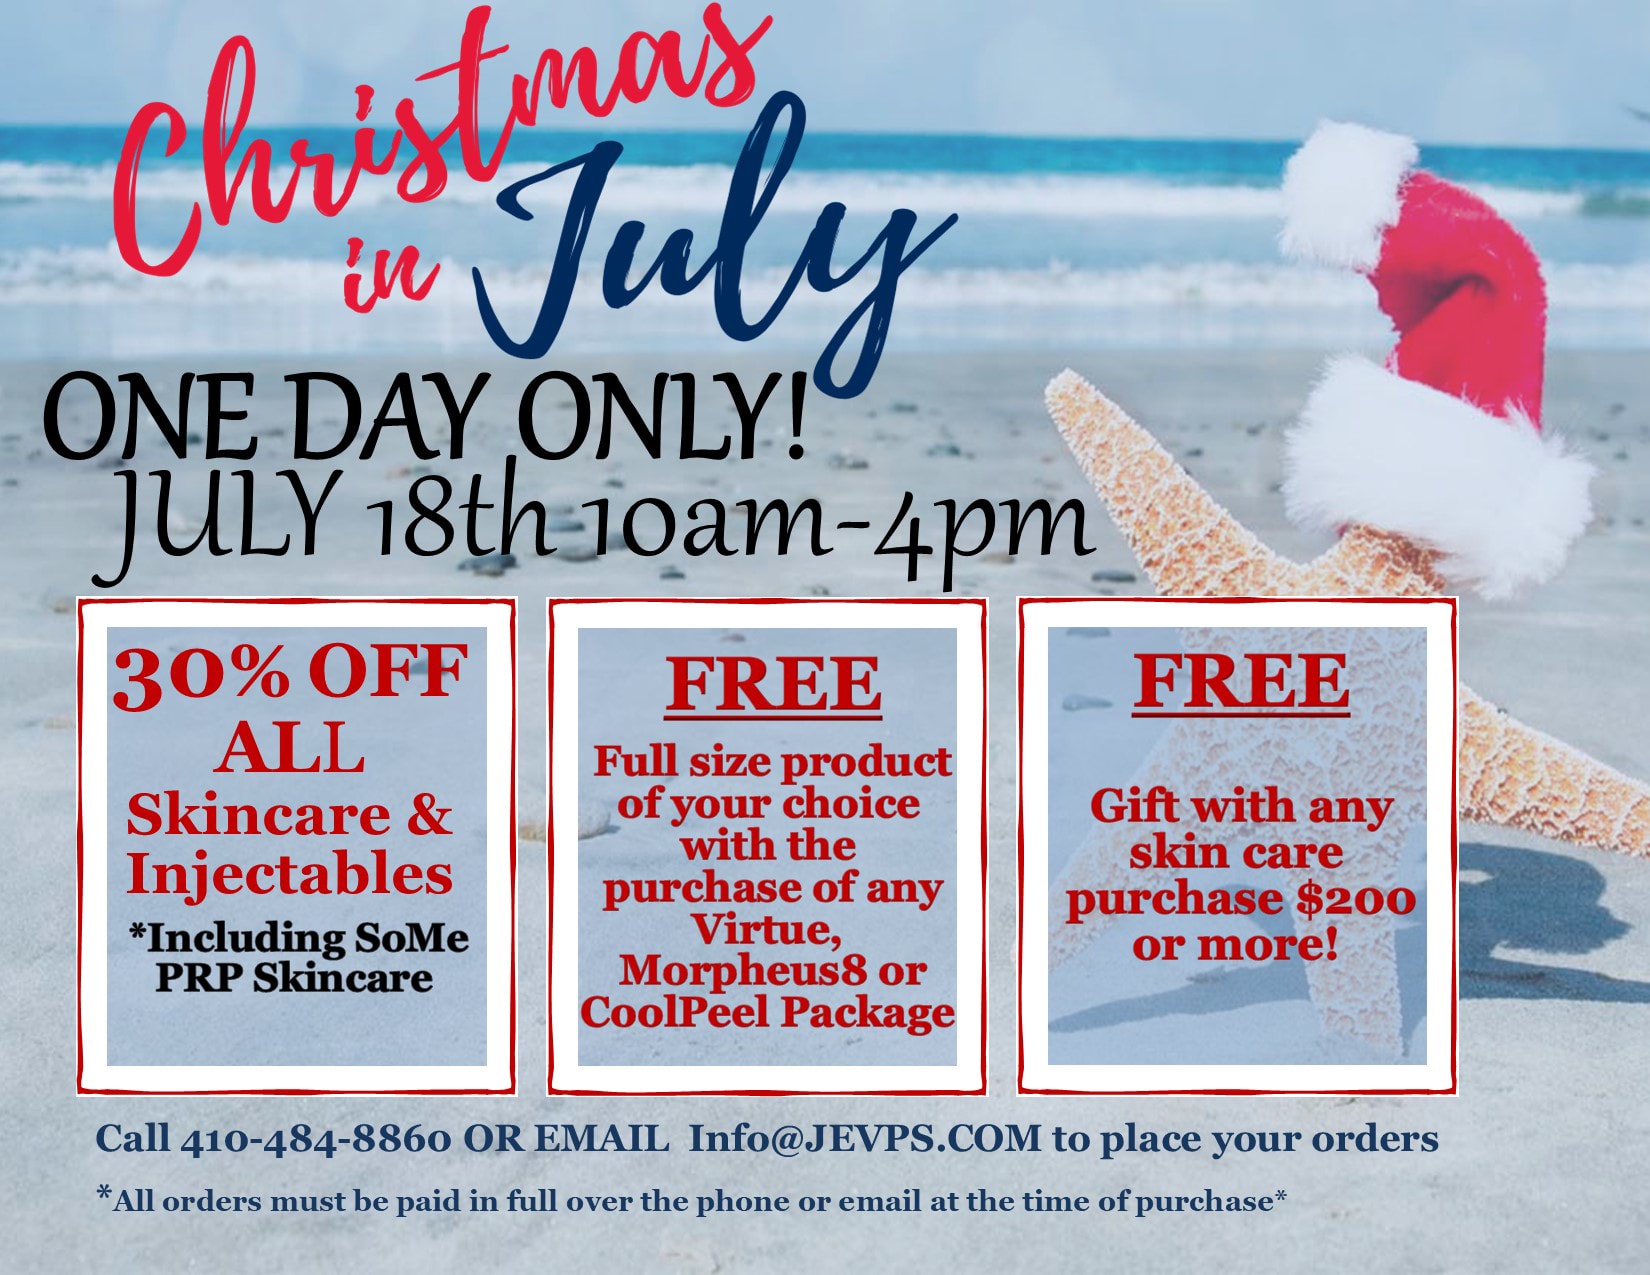 Christmas in July: One Day Only! July 18th 10 am to 4 pm. 30% off all skincare and injectables including SoMe PRP Skincare. Free full size product of your choice with the purchase of any Virtue, Morpheus8 or CoolPeel Package. Free gift with any skin care purchase $200 or more! Call 410-484-8860 or email info@jevps.com to place your orders. All orders must be paid in full over the phone or email at the time of purchase.